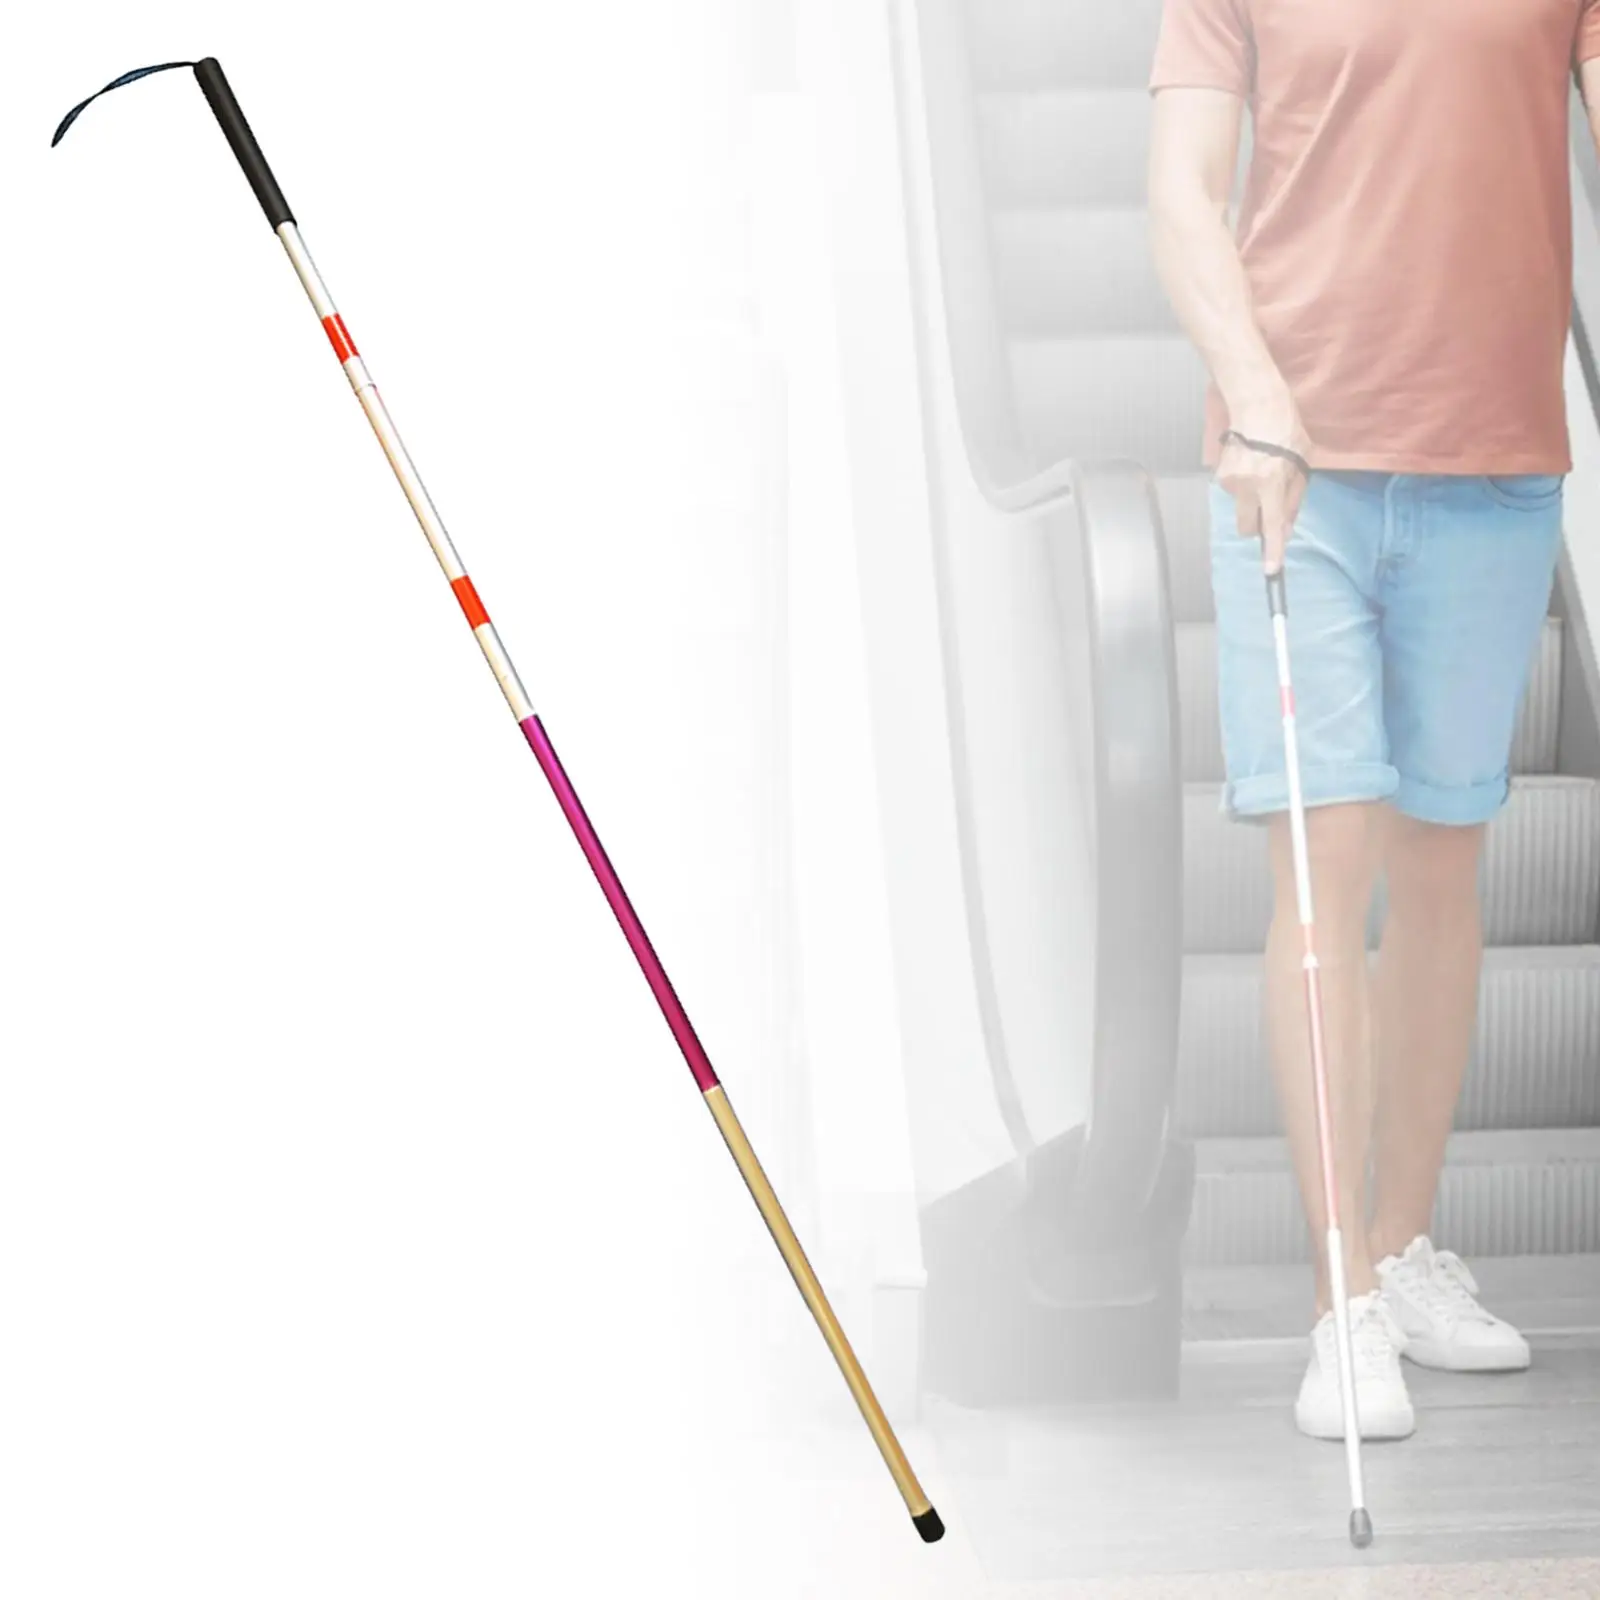 Portable Folding Mobility Cane Comfortable Adjustable Hand Walking Stick Reflective Guide Crutch Walking Stick for Blind People